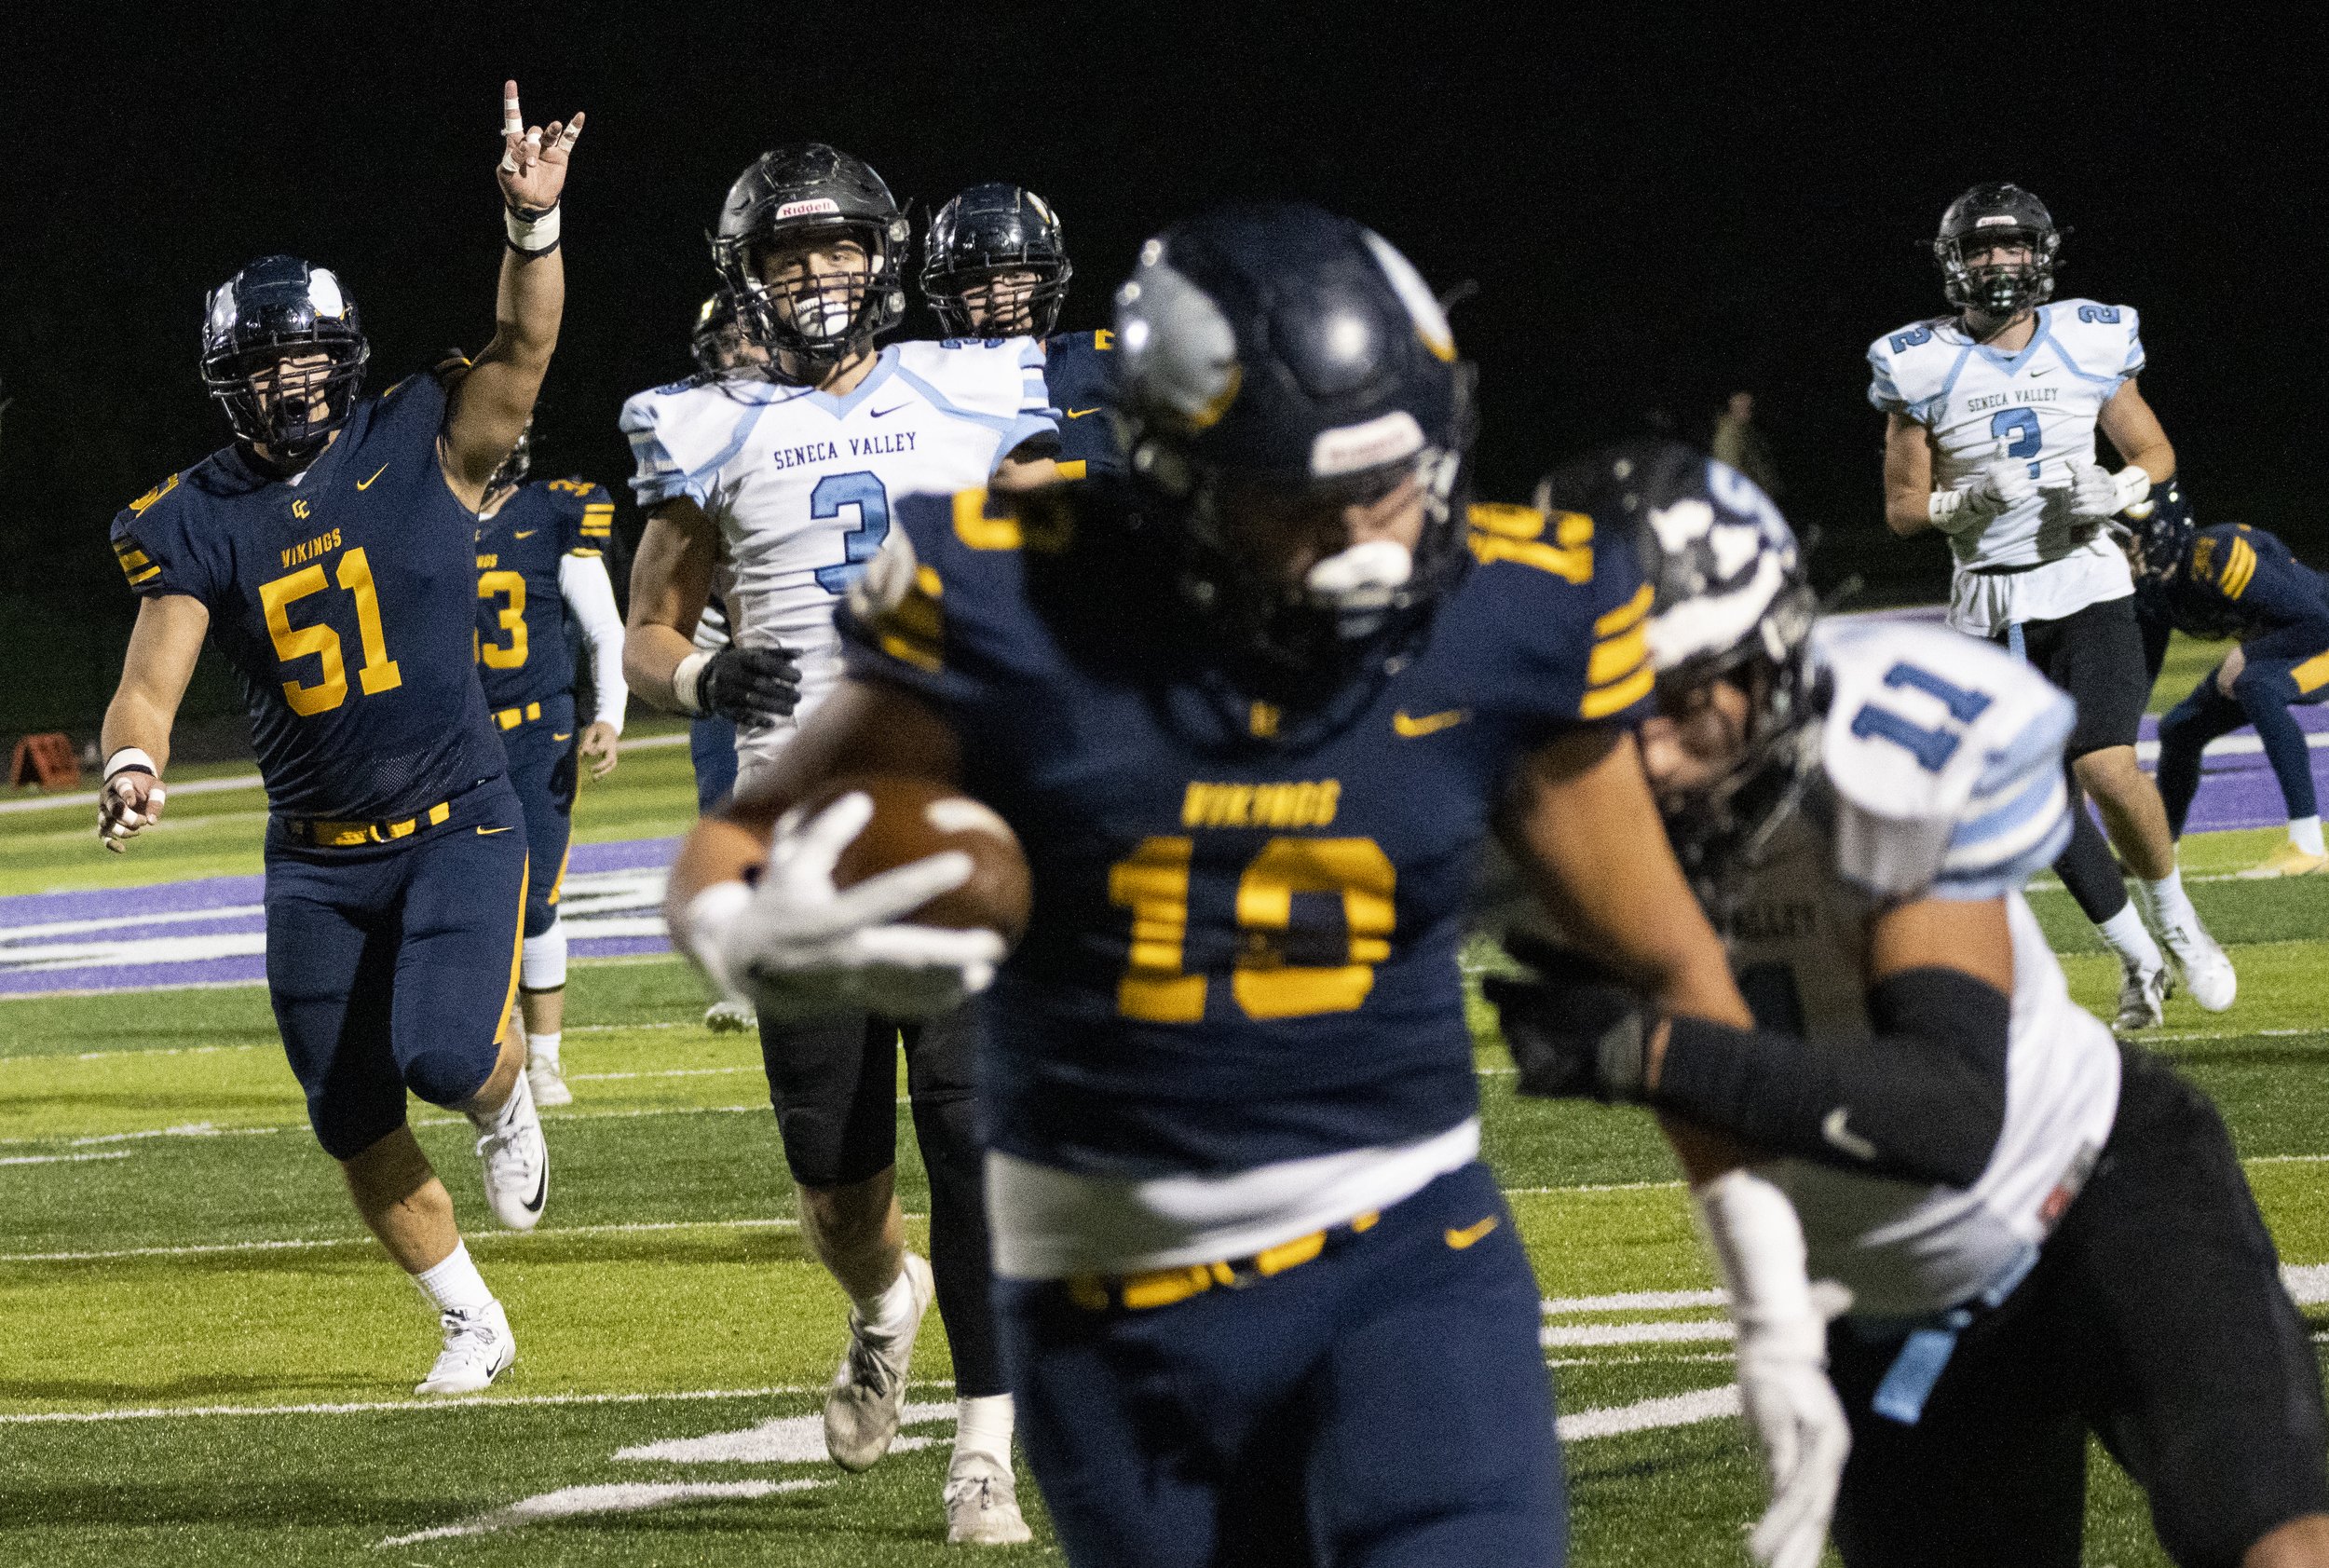  Central Catholic’s Donovan Hinish cheers on his teammate Josh Altsman as he approaches the end zone on Friday, Nov. 12, 2021, at Baldwin High School in Whitehall, Pa. Altsman fumbled the ball, but Hinish recovered it for the touchdown. (Emily Matthe